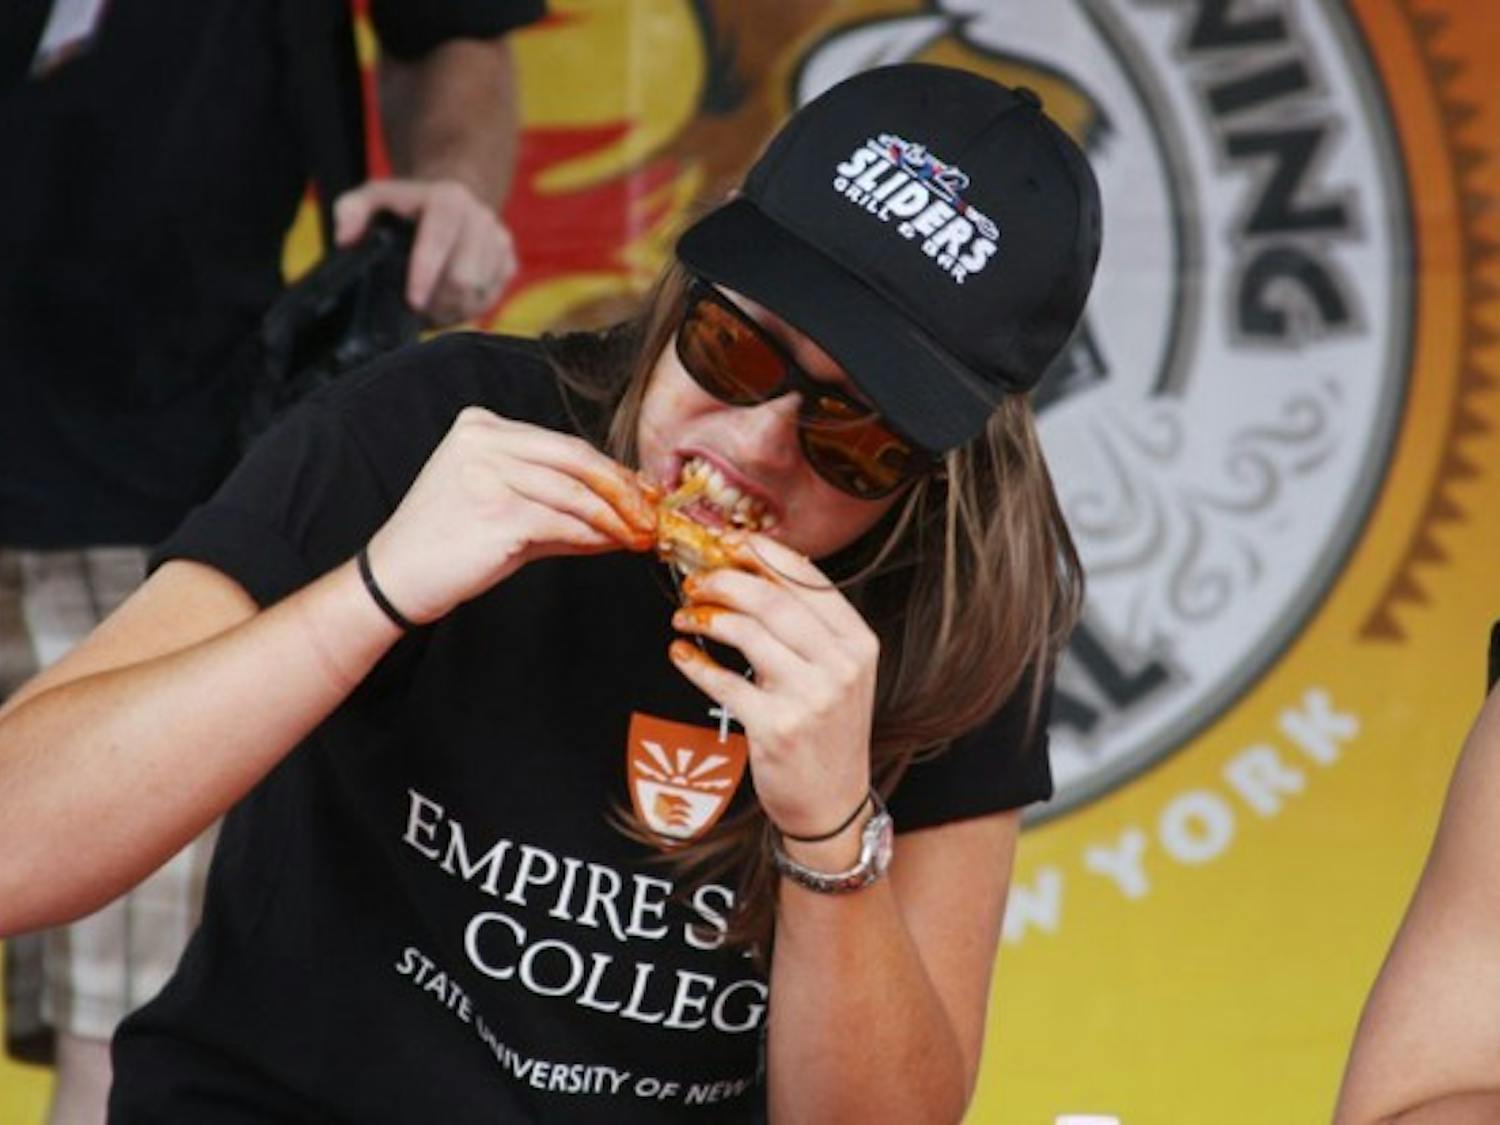 Lauren Joyce (pictured) represented Empire State College as one of 8 competitors in Sunday&rsquo;s college wing eating competition. Representatives from UB, Medaille, RIT, Northwestern, Buffalo State College and Canisius had eight minutes to eat 25 wings from Sliders Bar &amp; Grill. The winner, who represented Medaille finished all 25 wings in five minutes 45 seconds and was the only one to finish all 25 wings. ?Jordan Oscar, The Spectrum